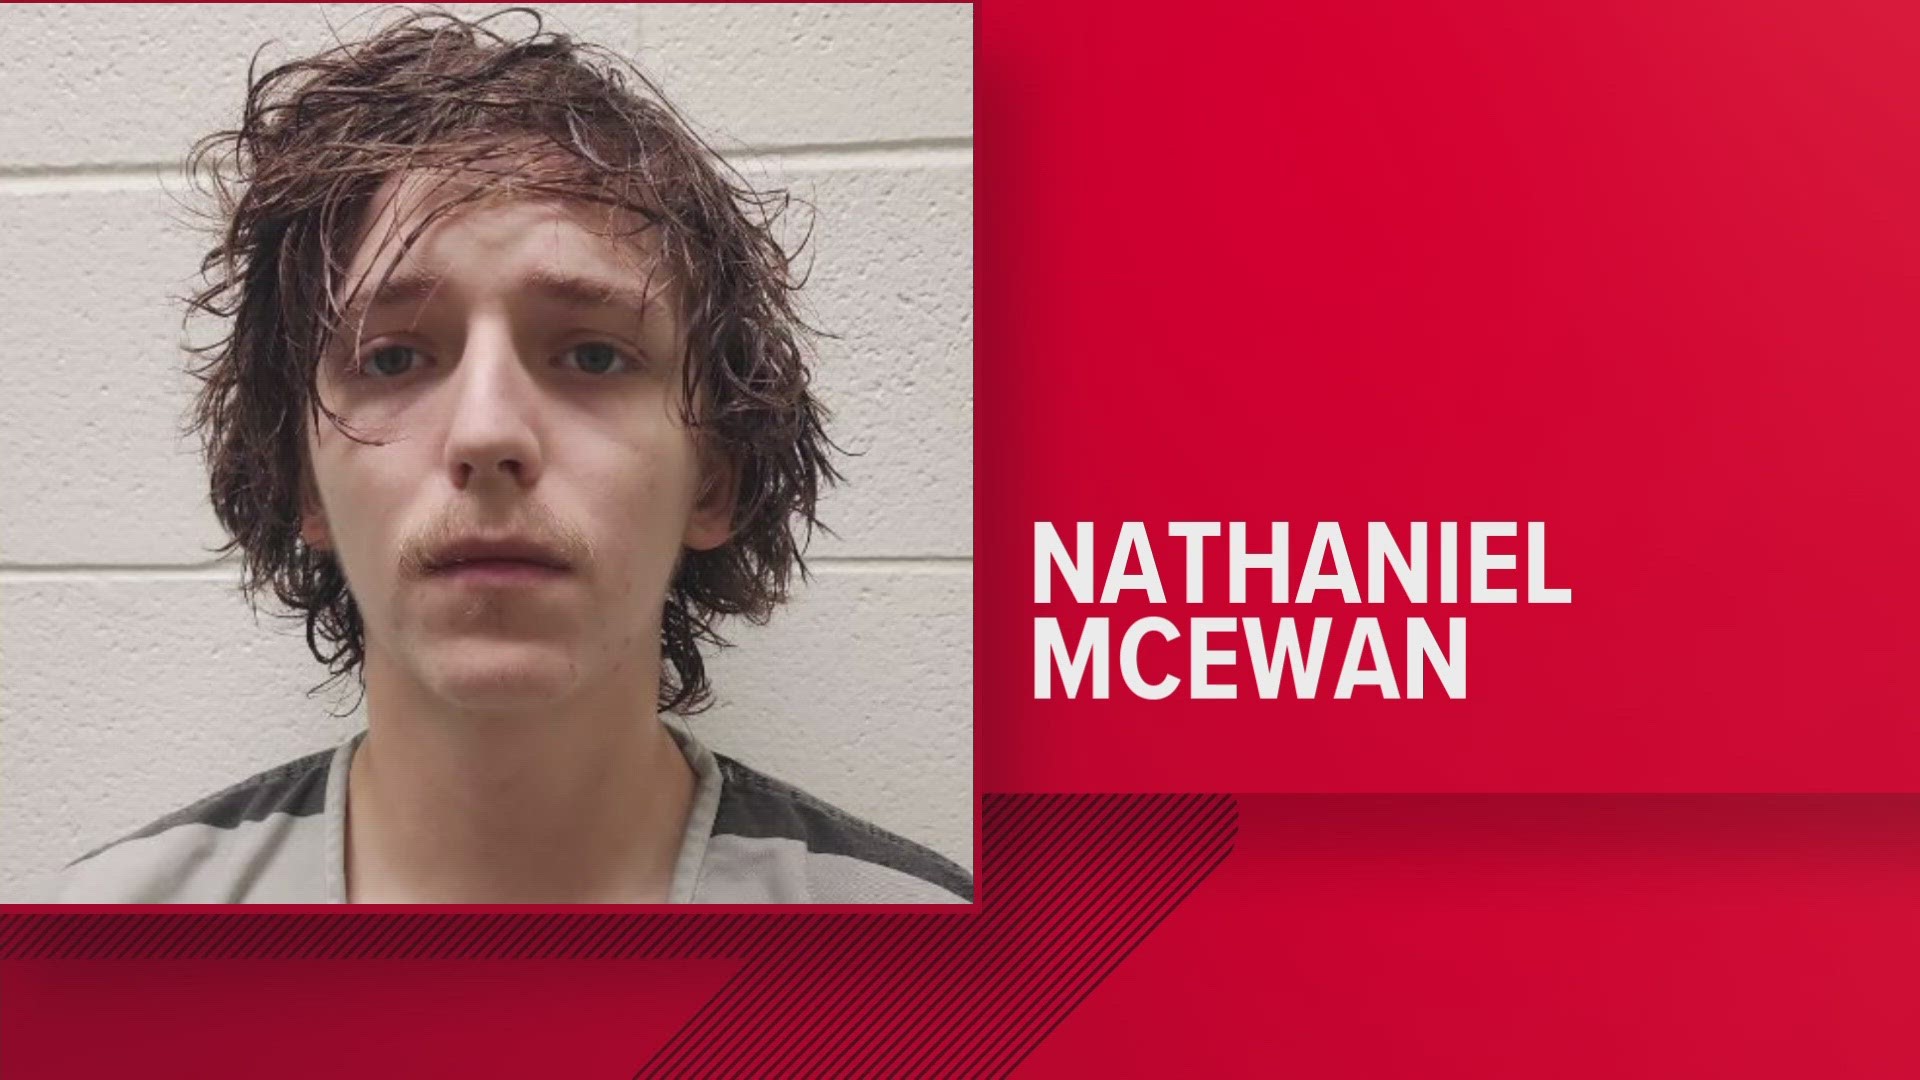 Nathaniel Kain McEwan was arrested on Thursday and is facing murder charges.